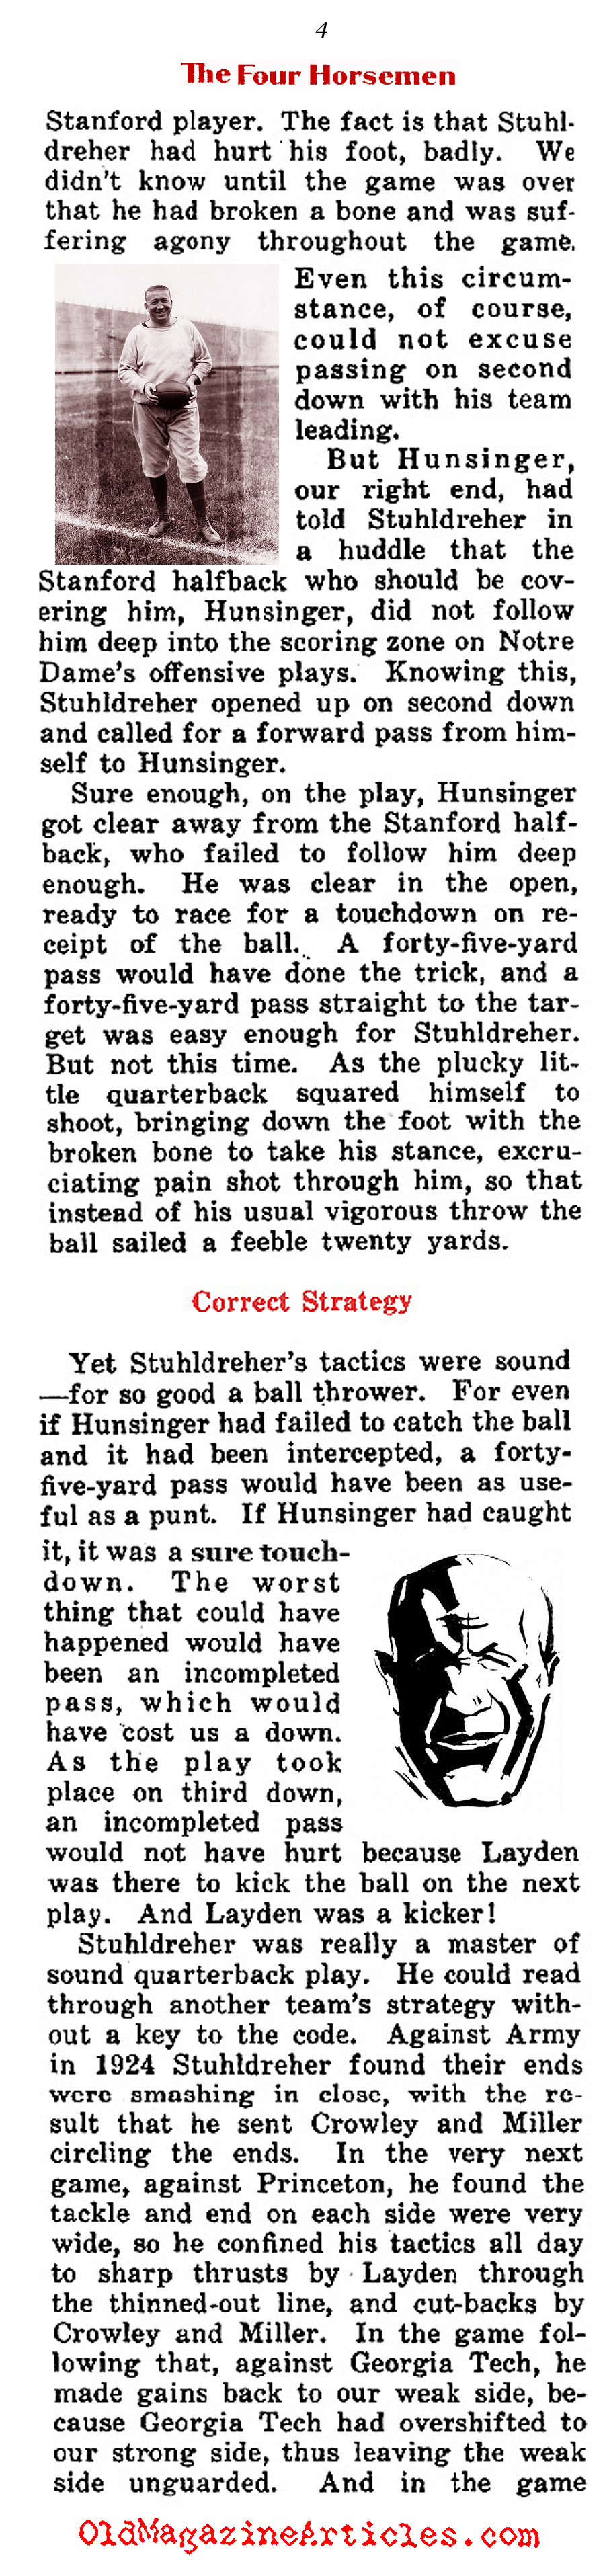 The Four Horsemen and Knute Rockne in His Own Words (Collier's Magazine, 1930)